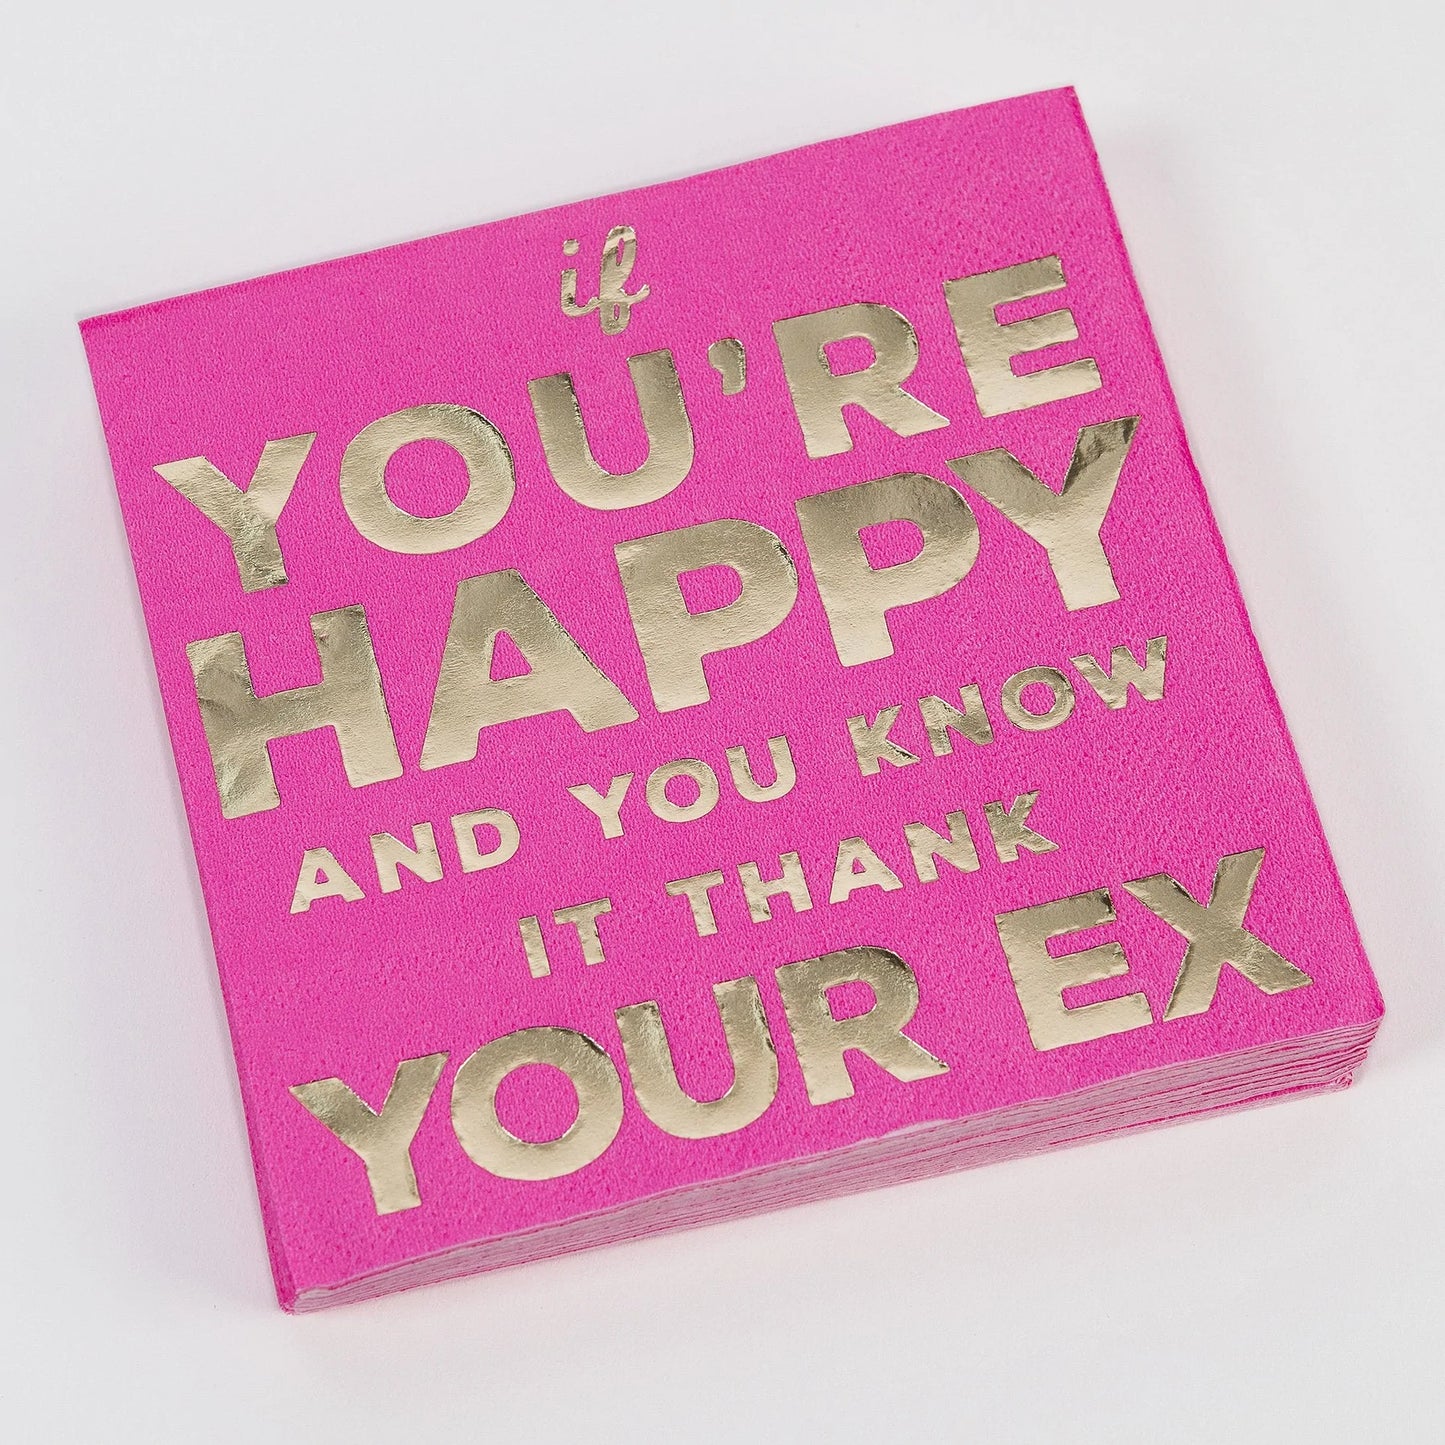 Cocktail Napkins: If You're Happy and You Know It...